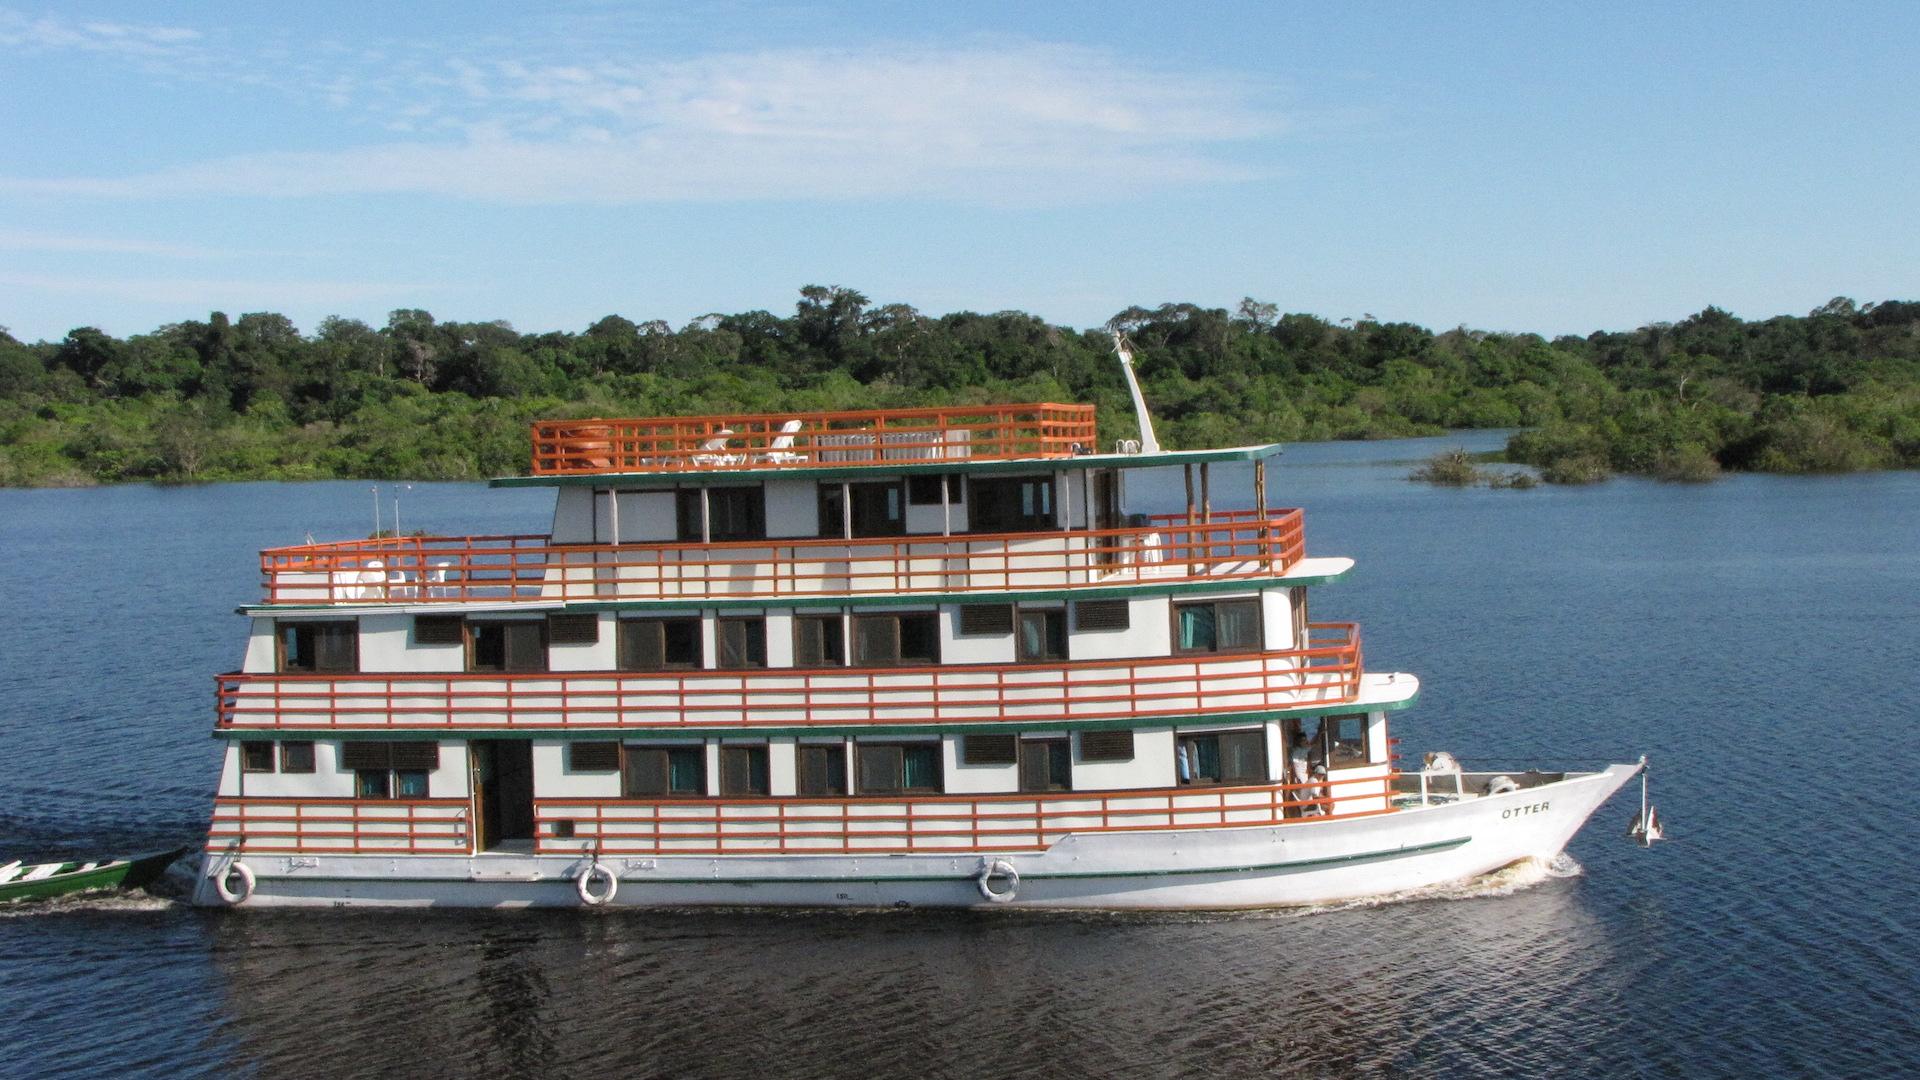 A typical Amazon Boat on a Cruise